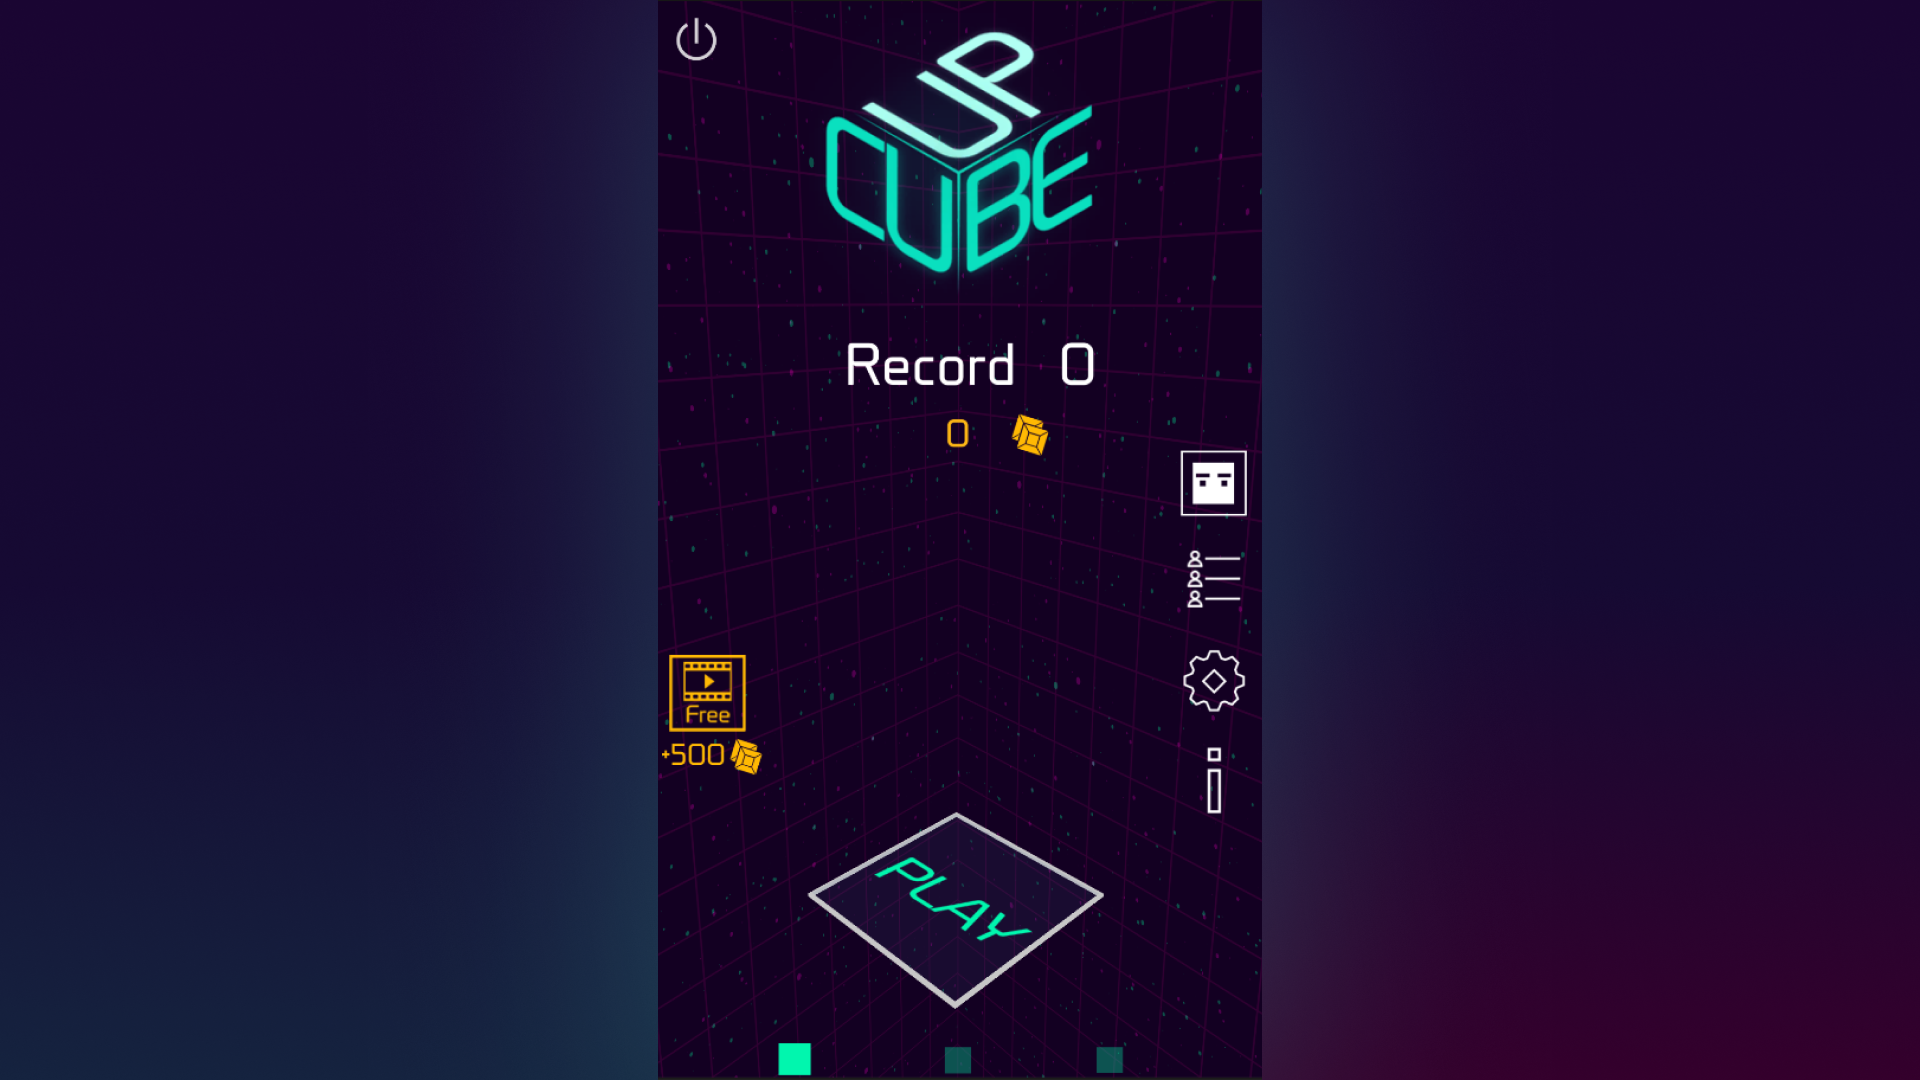 Cube Up menu with the last record written in the center